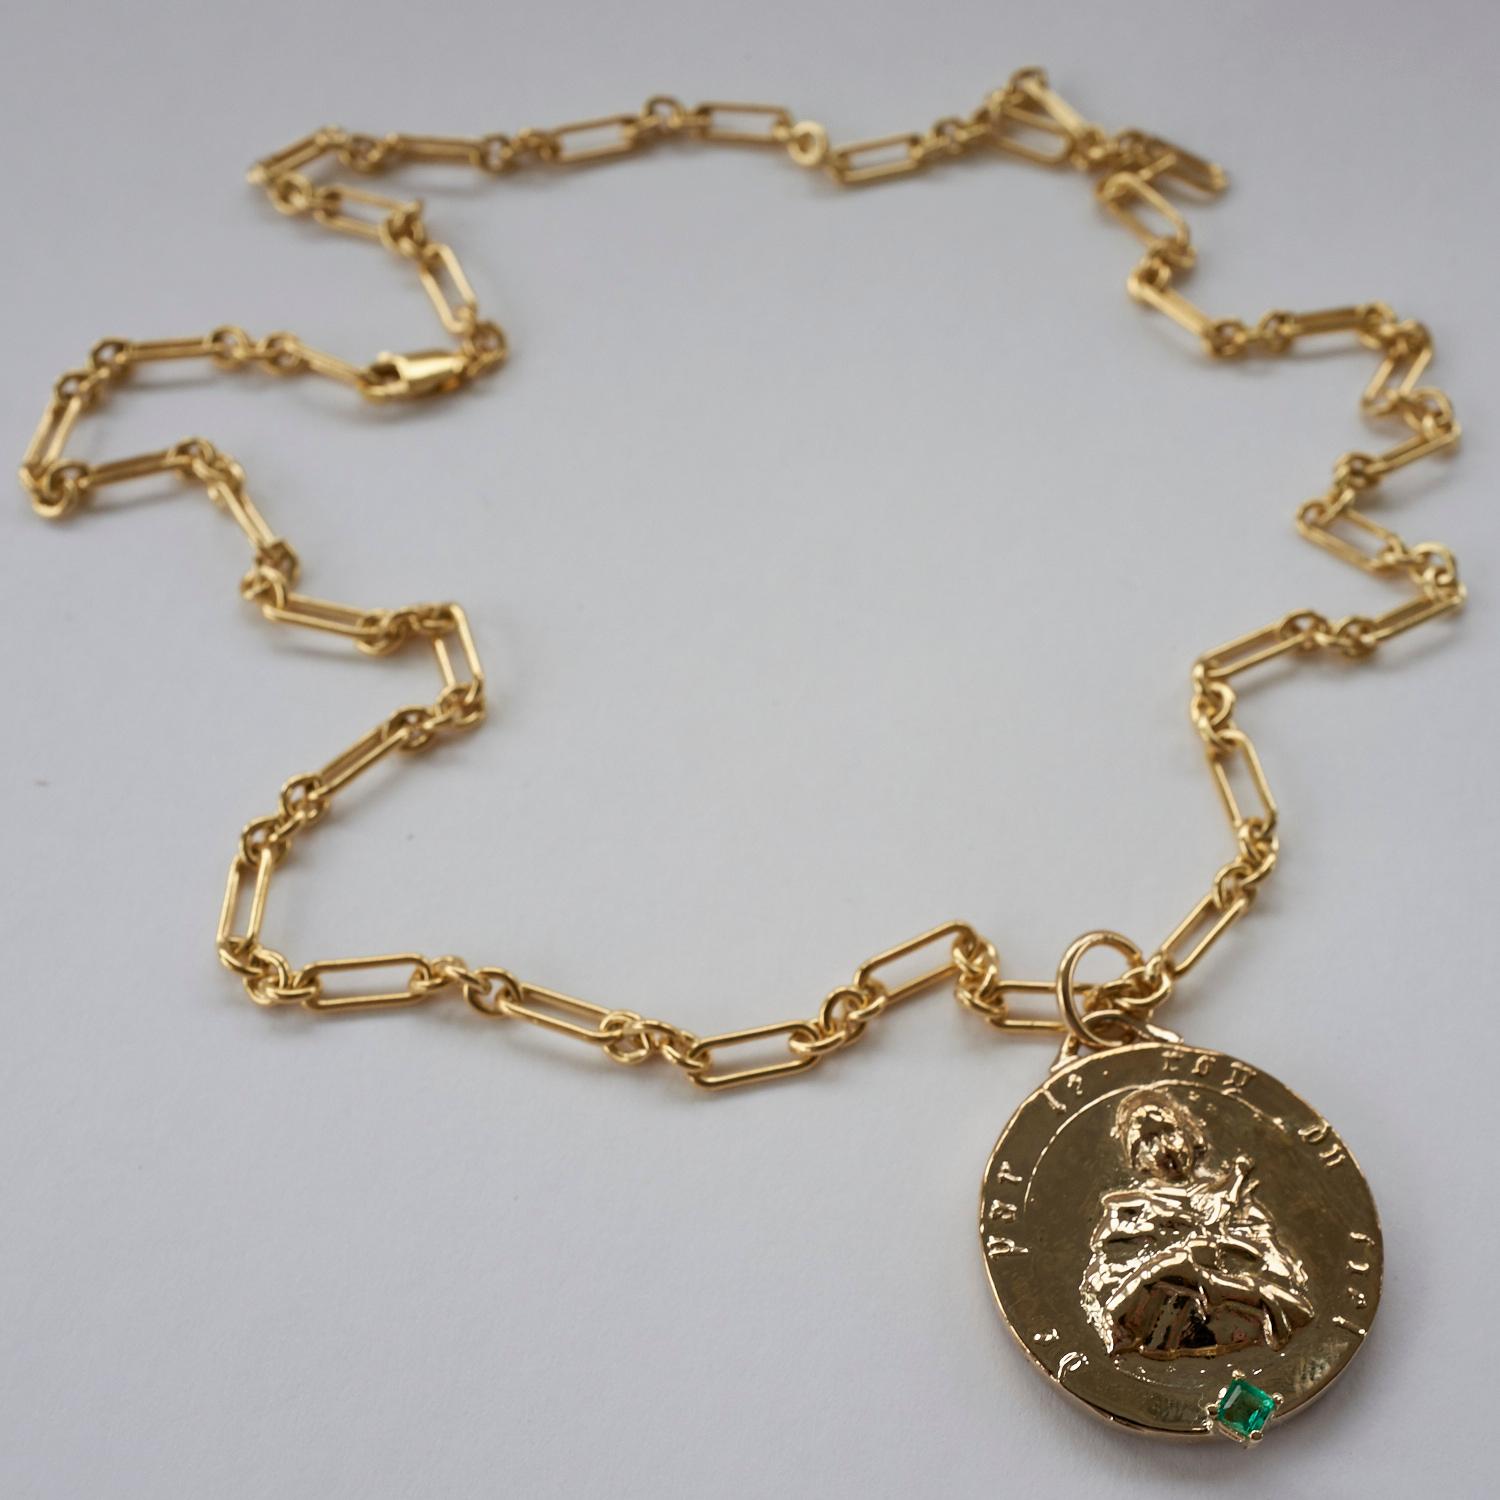 Contemporary Emerald Medal Long Chunky Chain Necklace Saint Joan of Arc J Dauphin